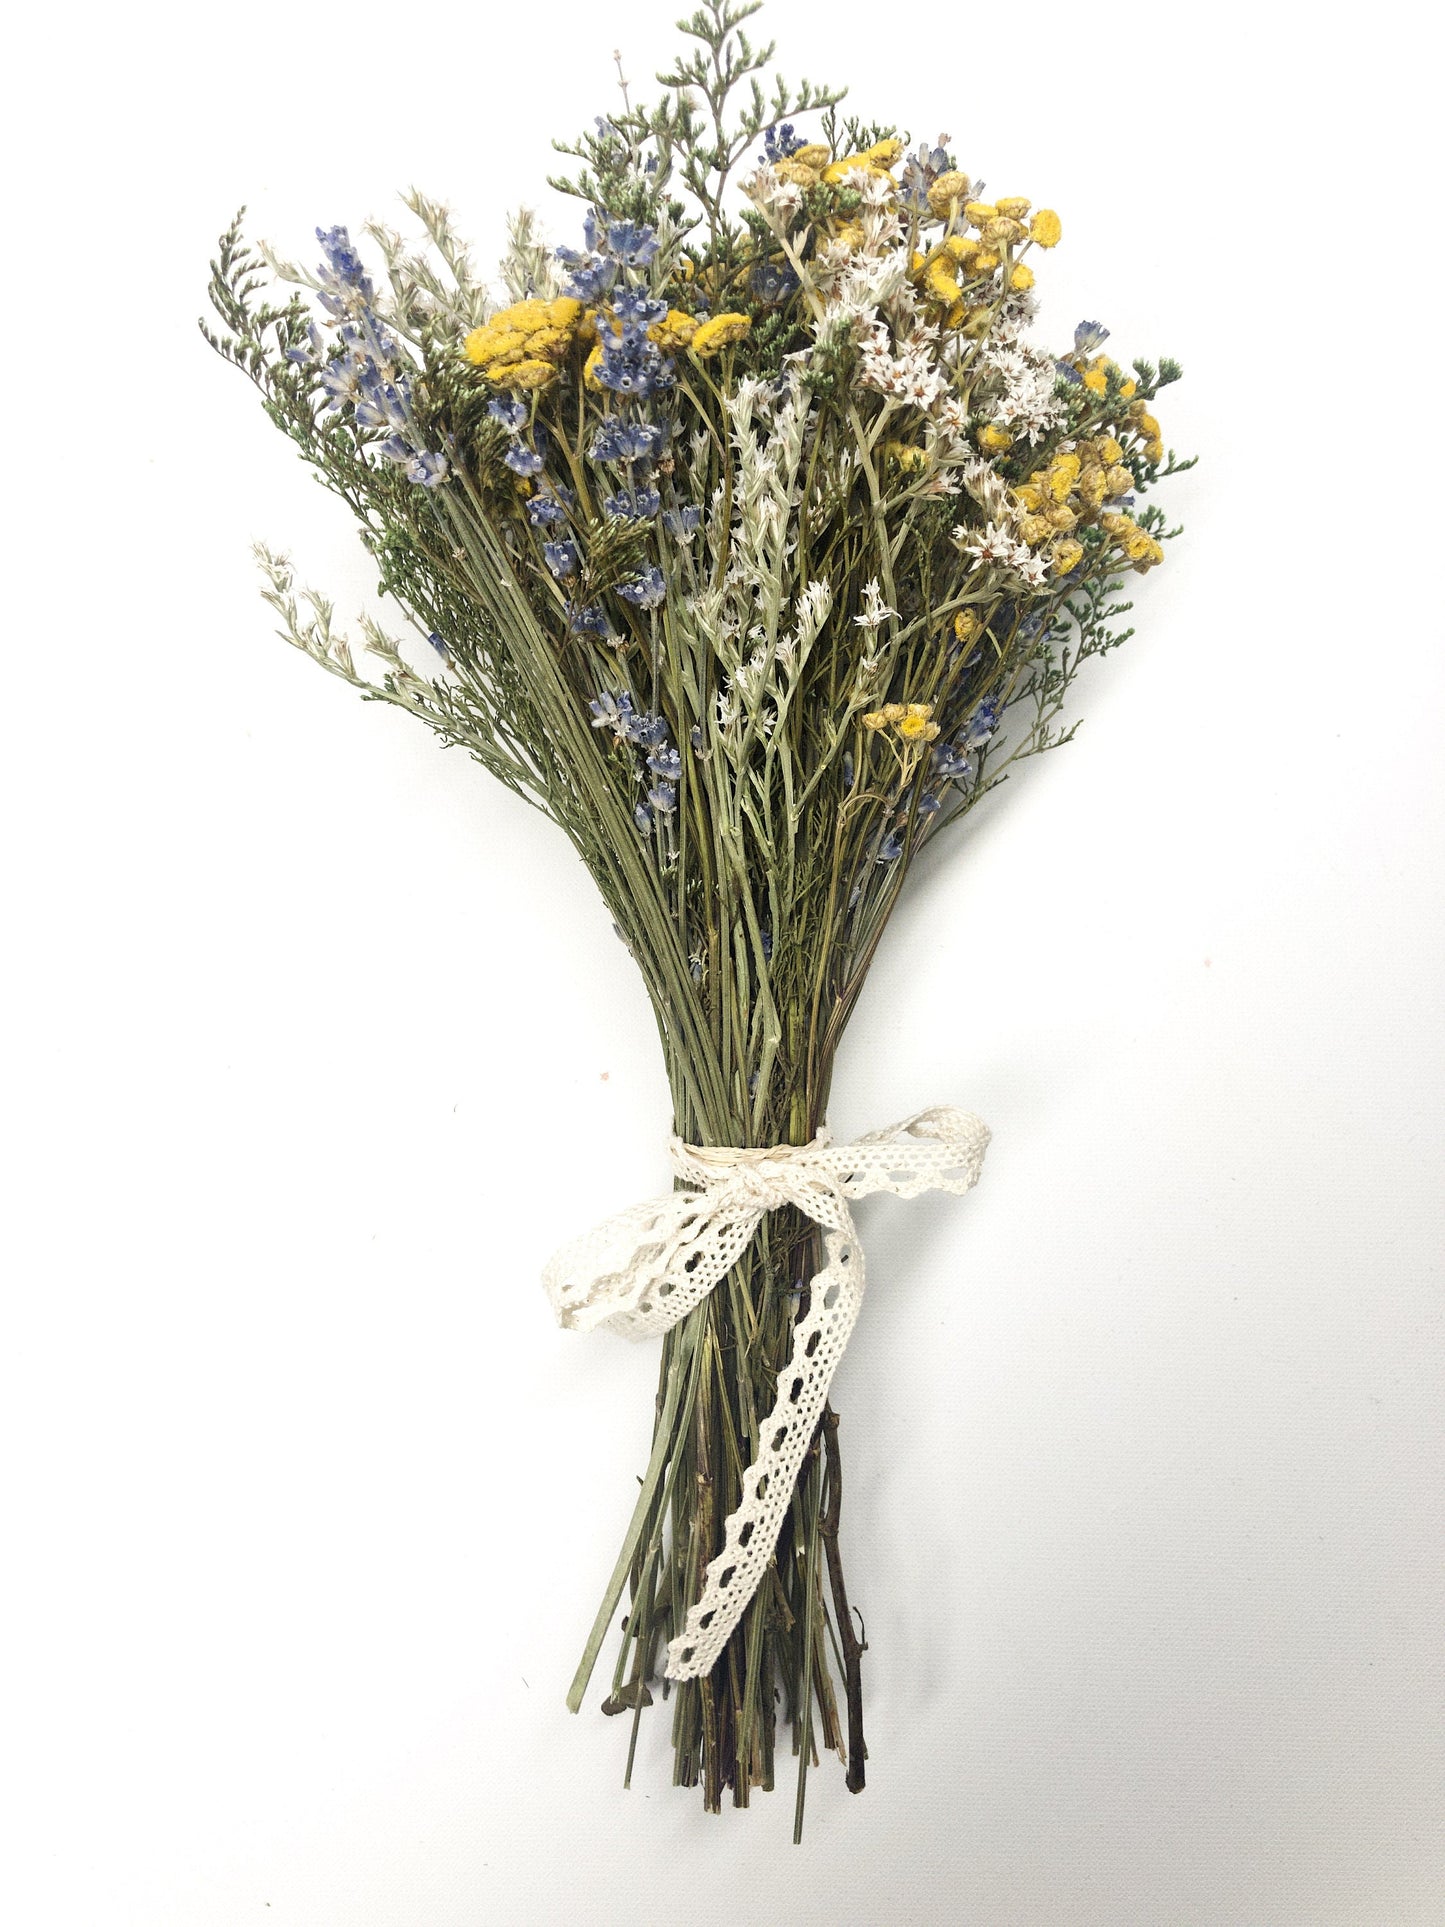 Fall Wedding, Dried Bouquet, Fall Details, Simple, Decoration, House Decor, Yellow, White, Green, Blue, Lavender, Rustic, Natural